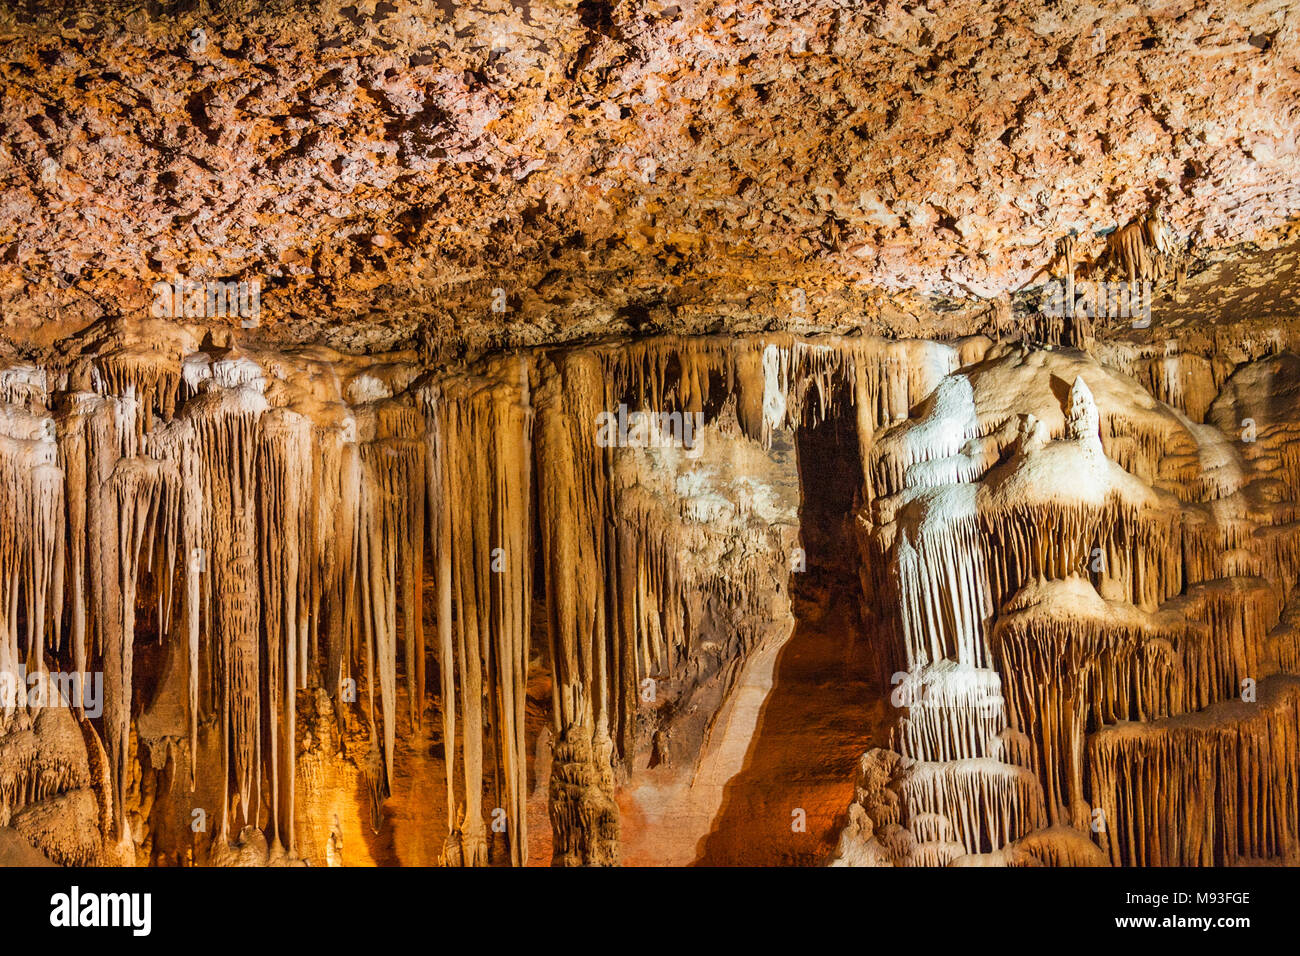 Blanchard Springs Caverns near Mountain View, Arkansas, is administered by the US Forest Service. Stock Photo